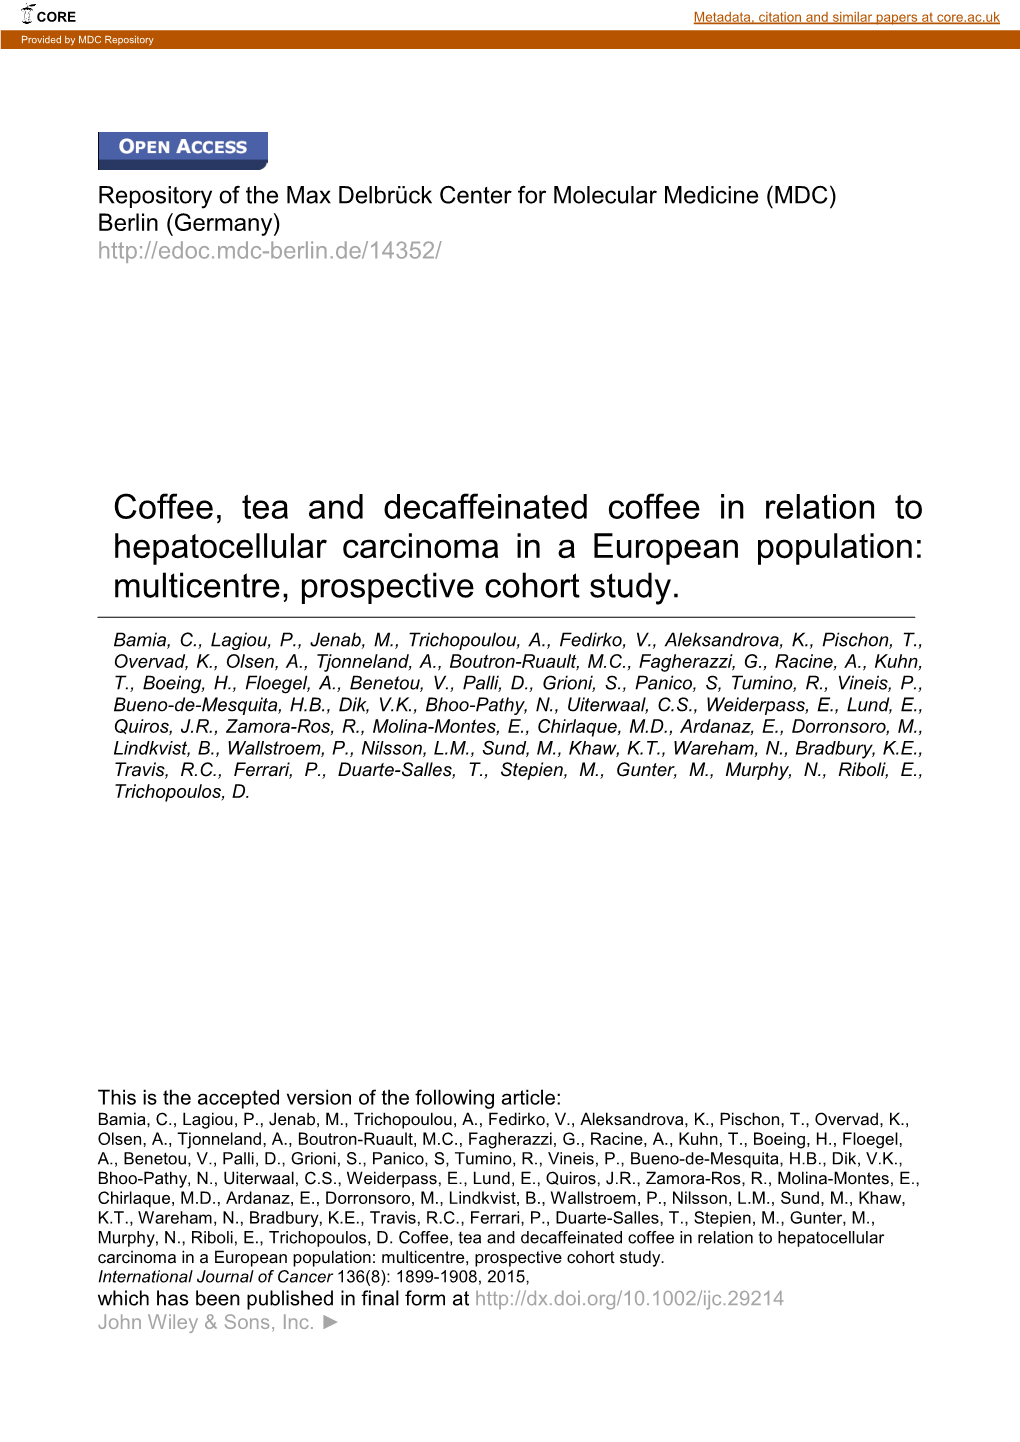 Coffee, Tea and Decaffeinated Coffee in Relation to Hepatocellular Carcinoma in a European Population: Multicentre, Prospective Cohort Study